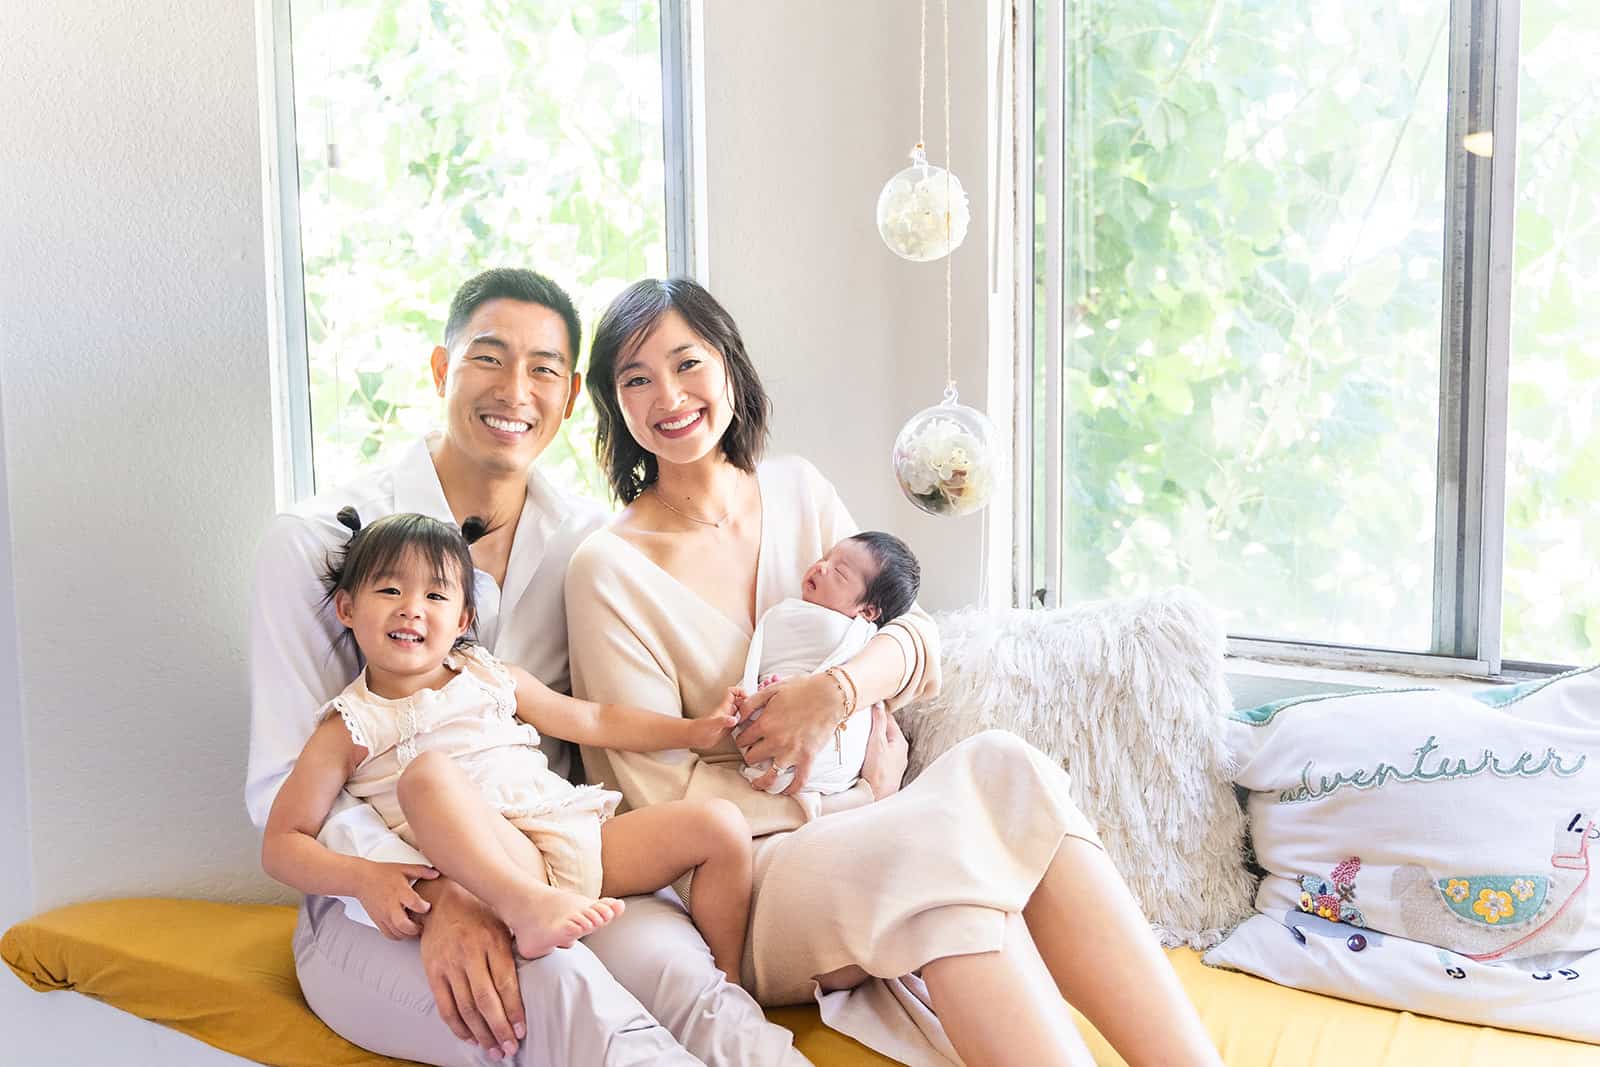 A mom and dad sit in a bay window with their newborn baby and toddler daughter in their laps